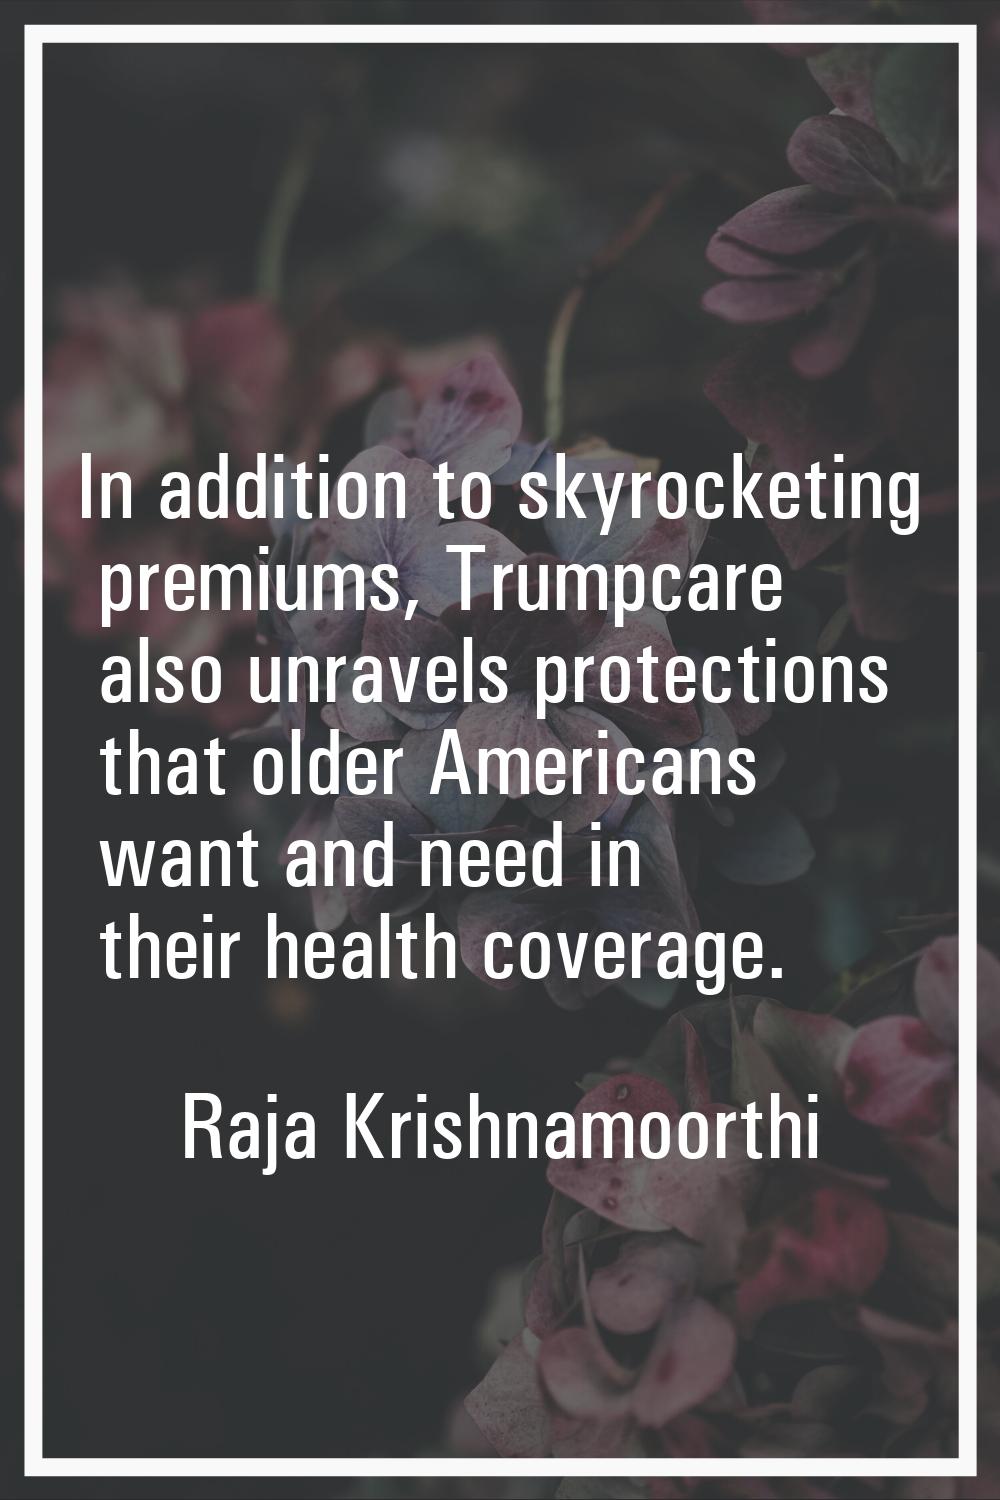 In addition to skyrocketing premiums, Trumpcare also unravels protections that older Americans want